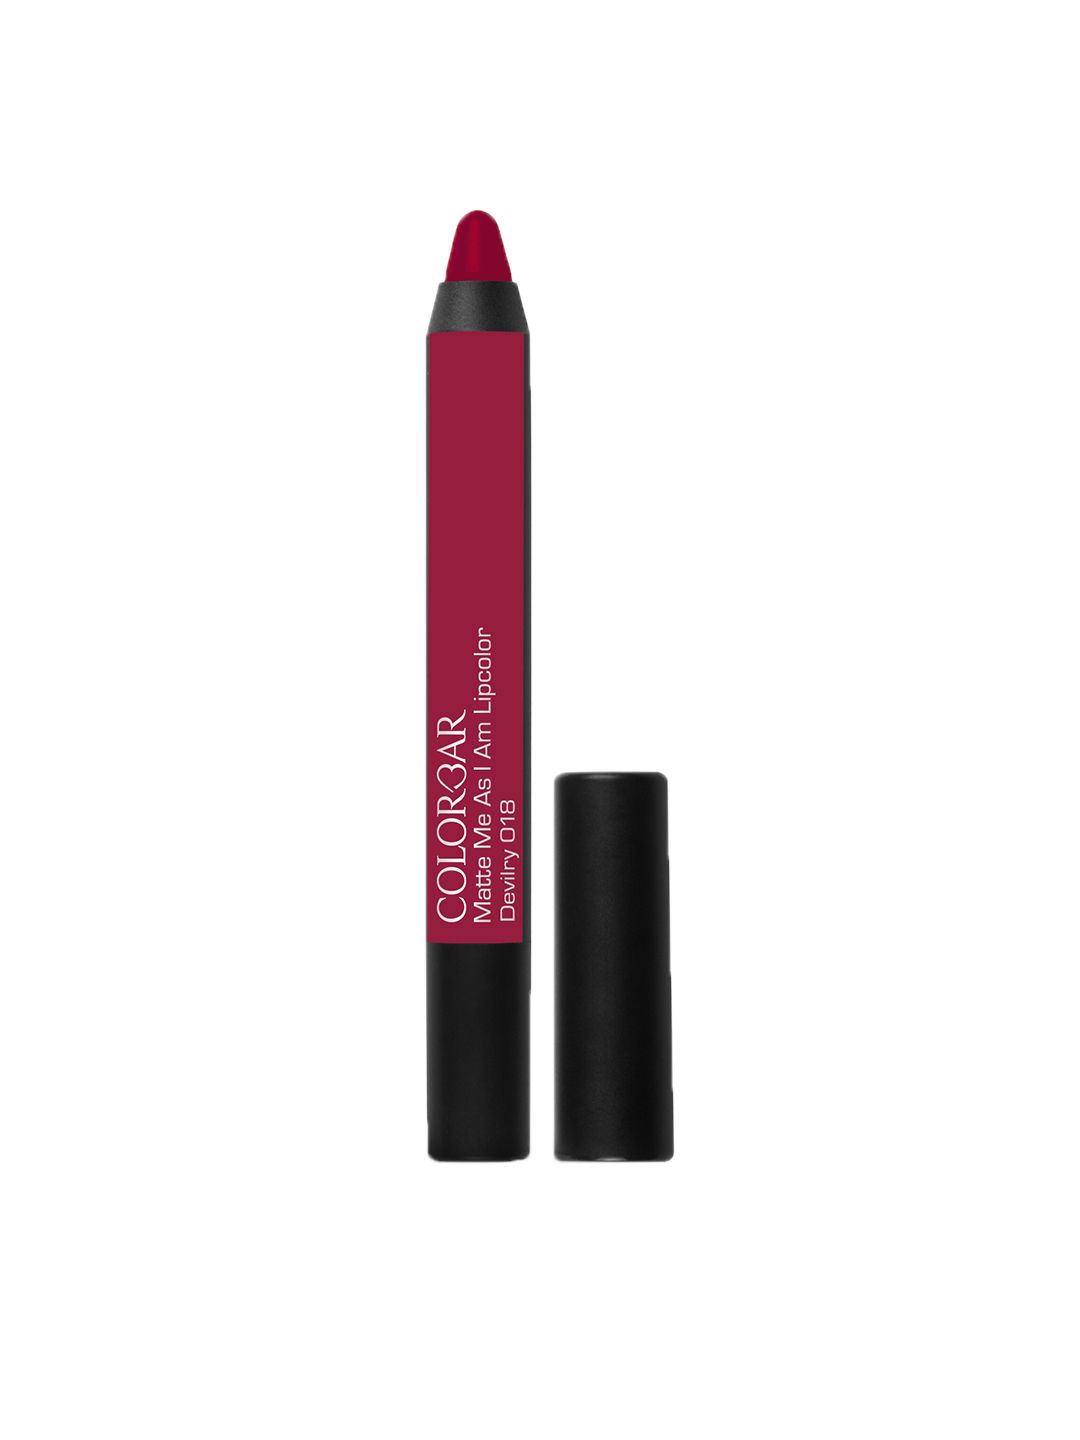 Colorbar Matte Me As I am Lipcolor - 018 Devilry Price in India